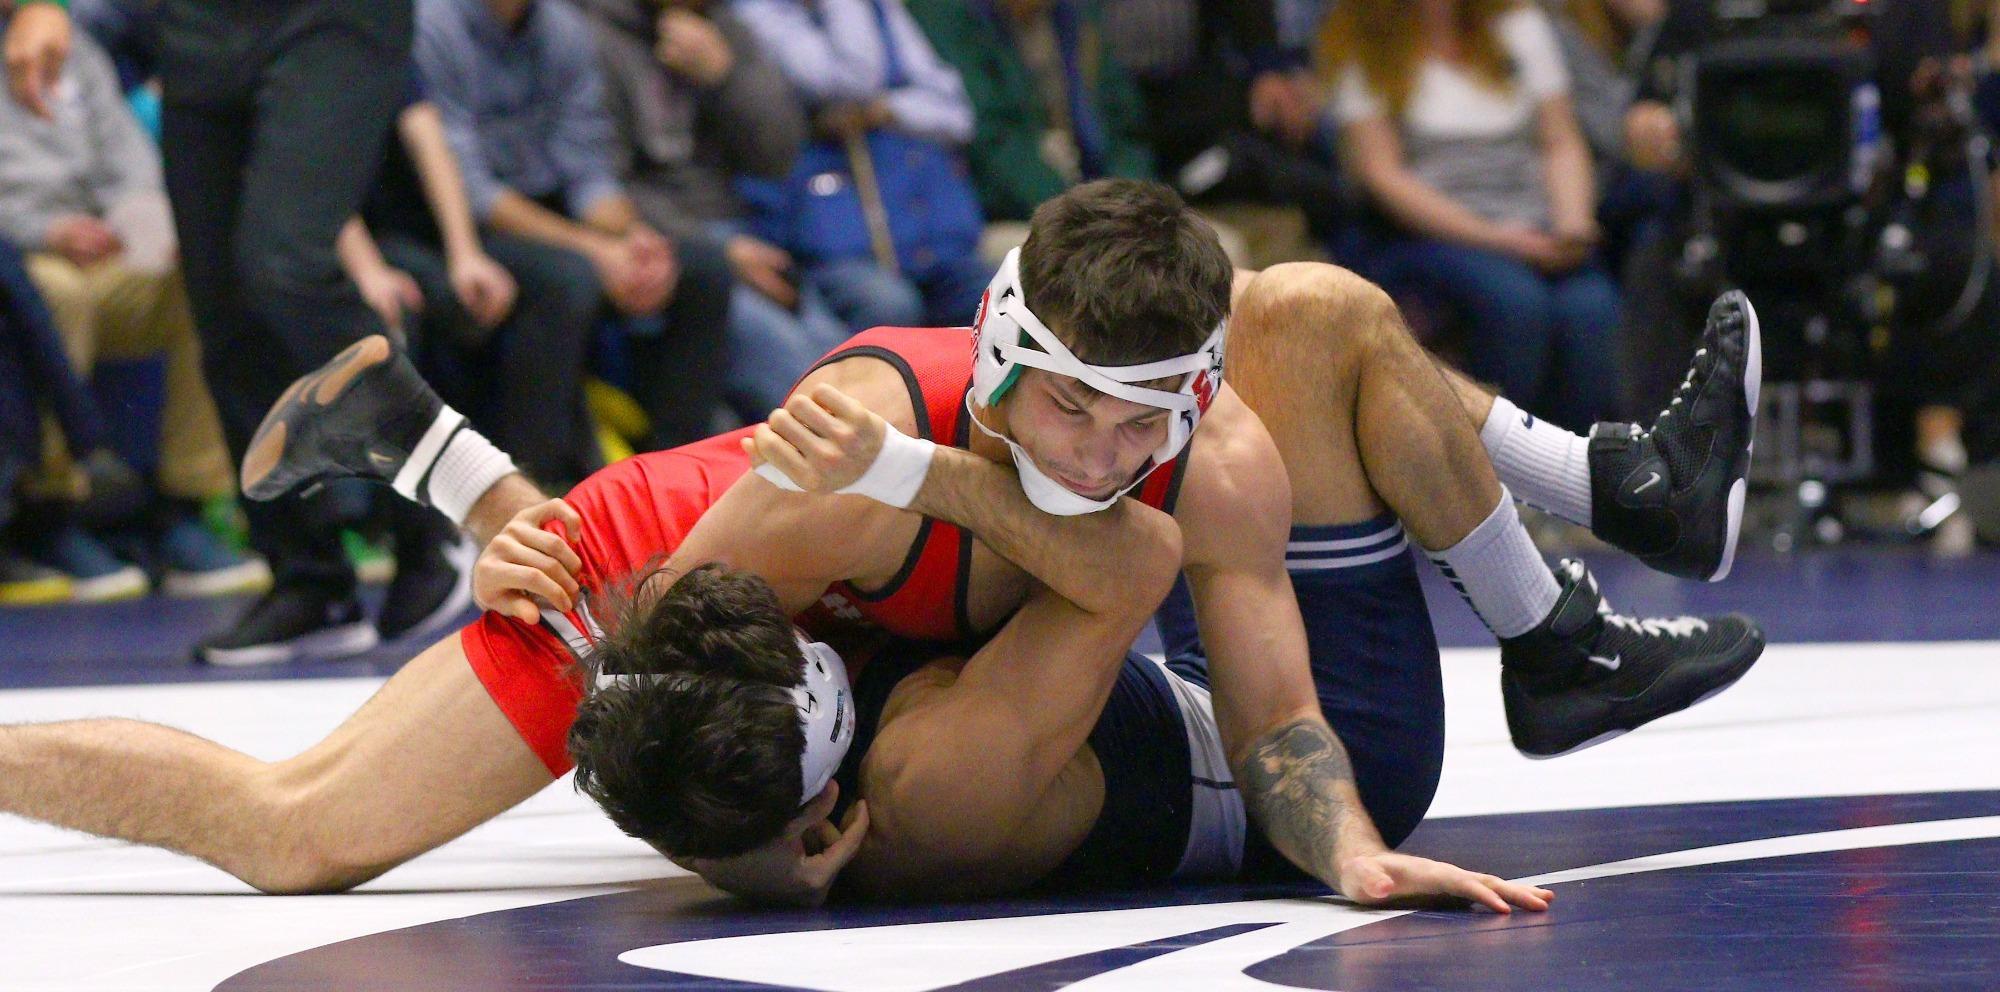 Penn State Downs Ohio State 28-9 in Sold Out Rec Hall - Penn State